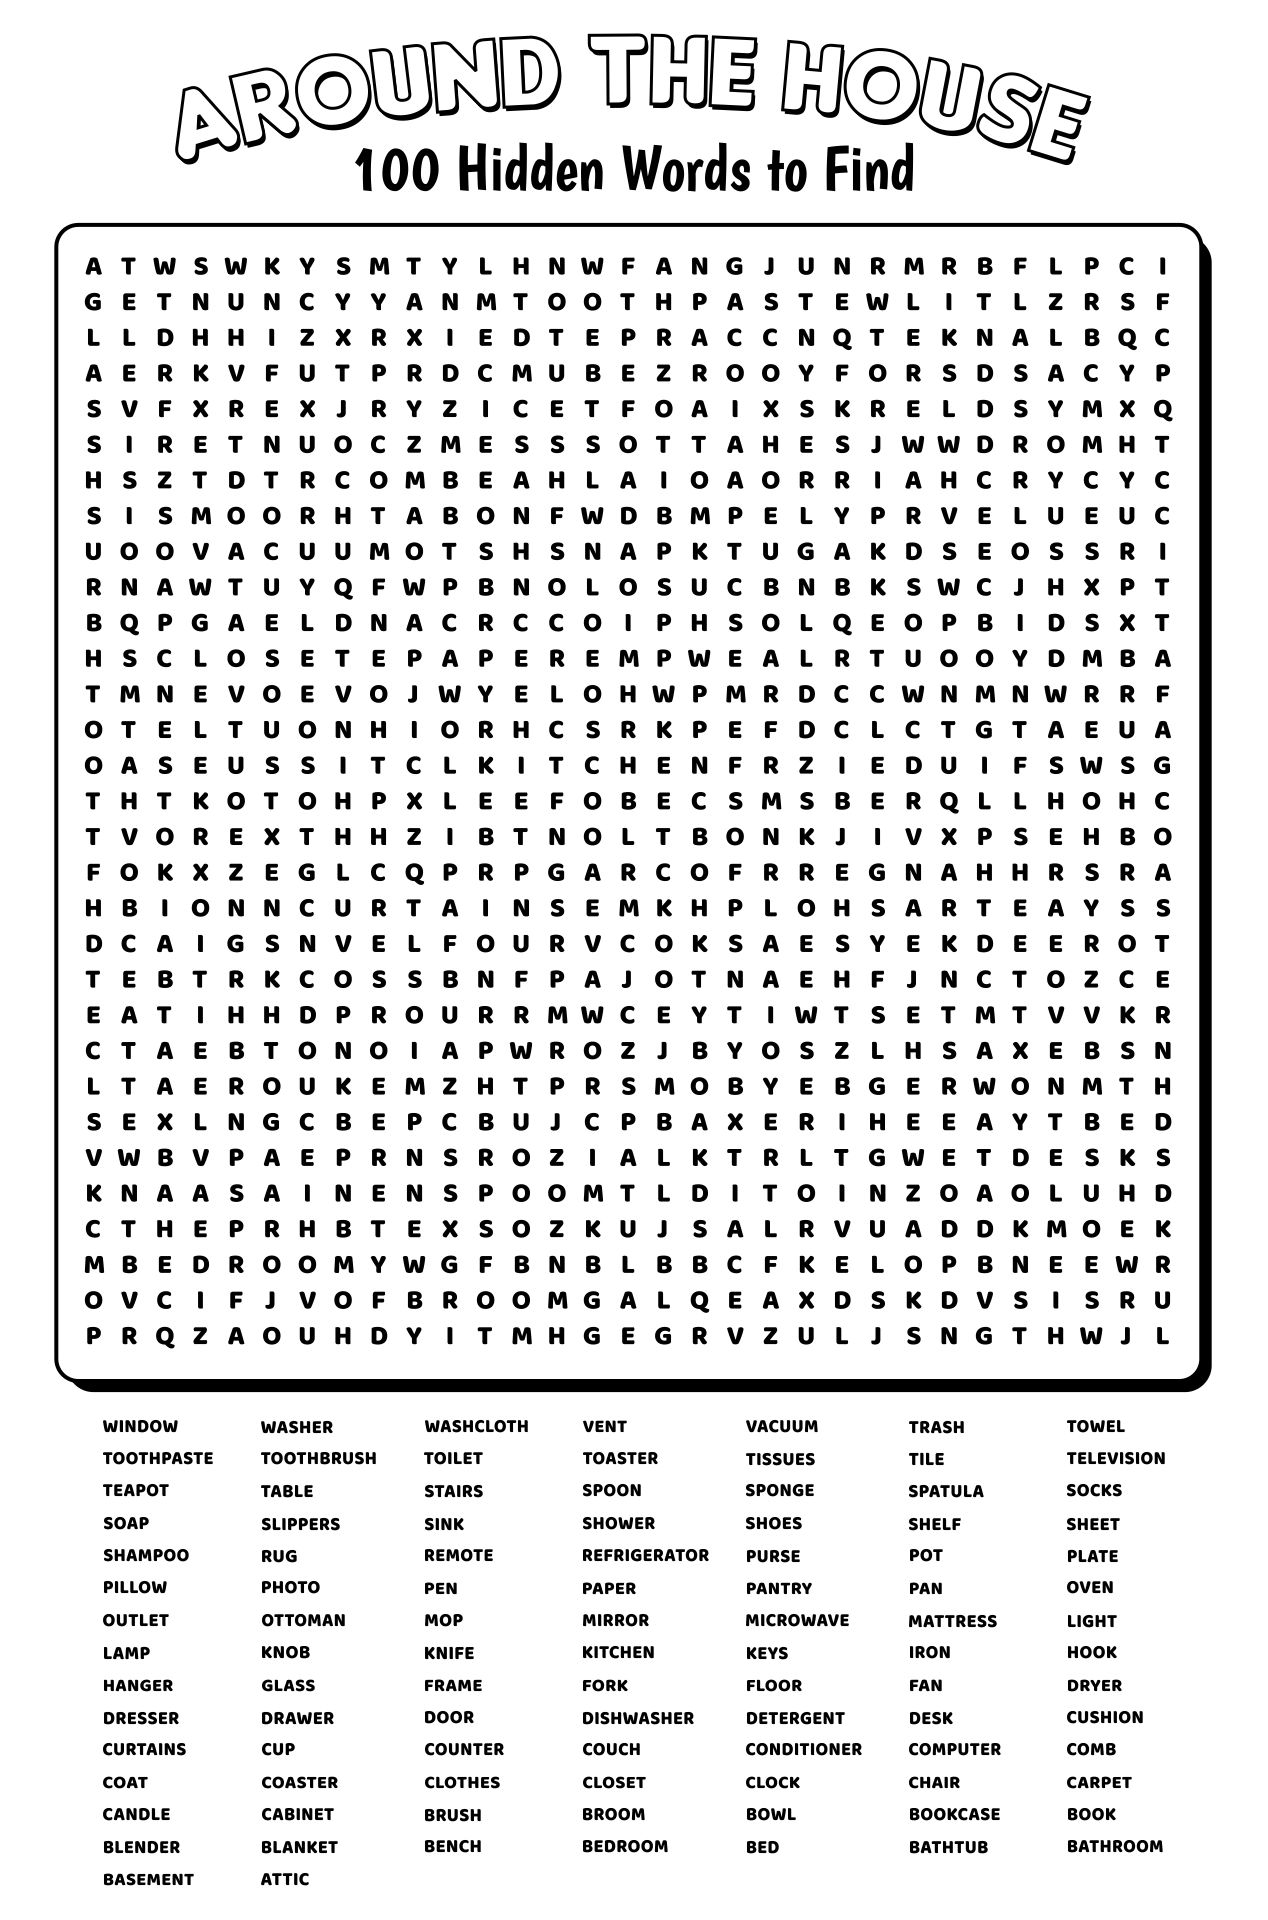 7-best-images-of-extremely-hard-word-search-printables-word-search